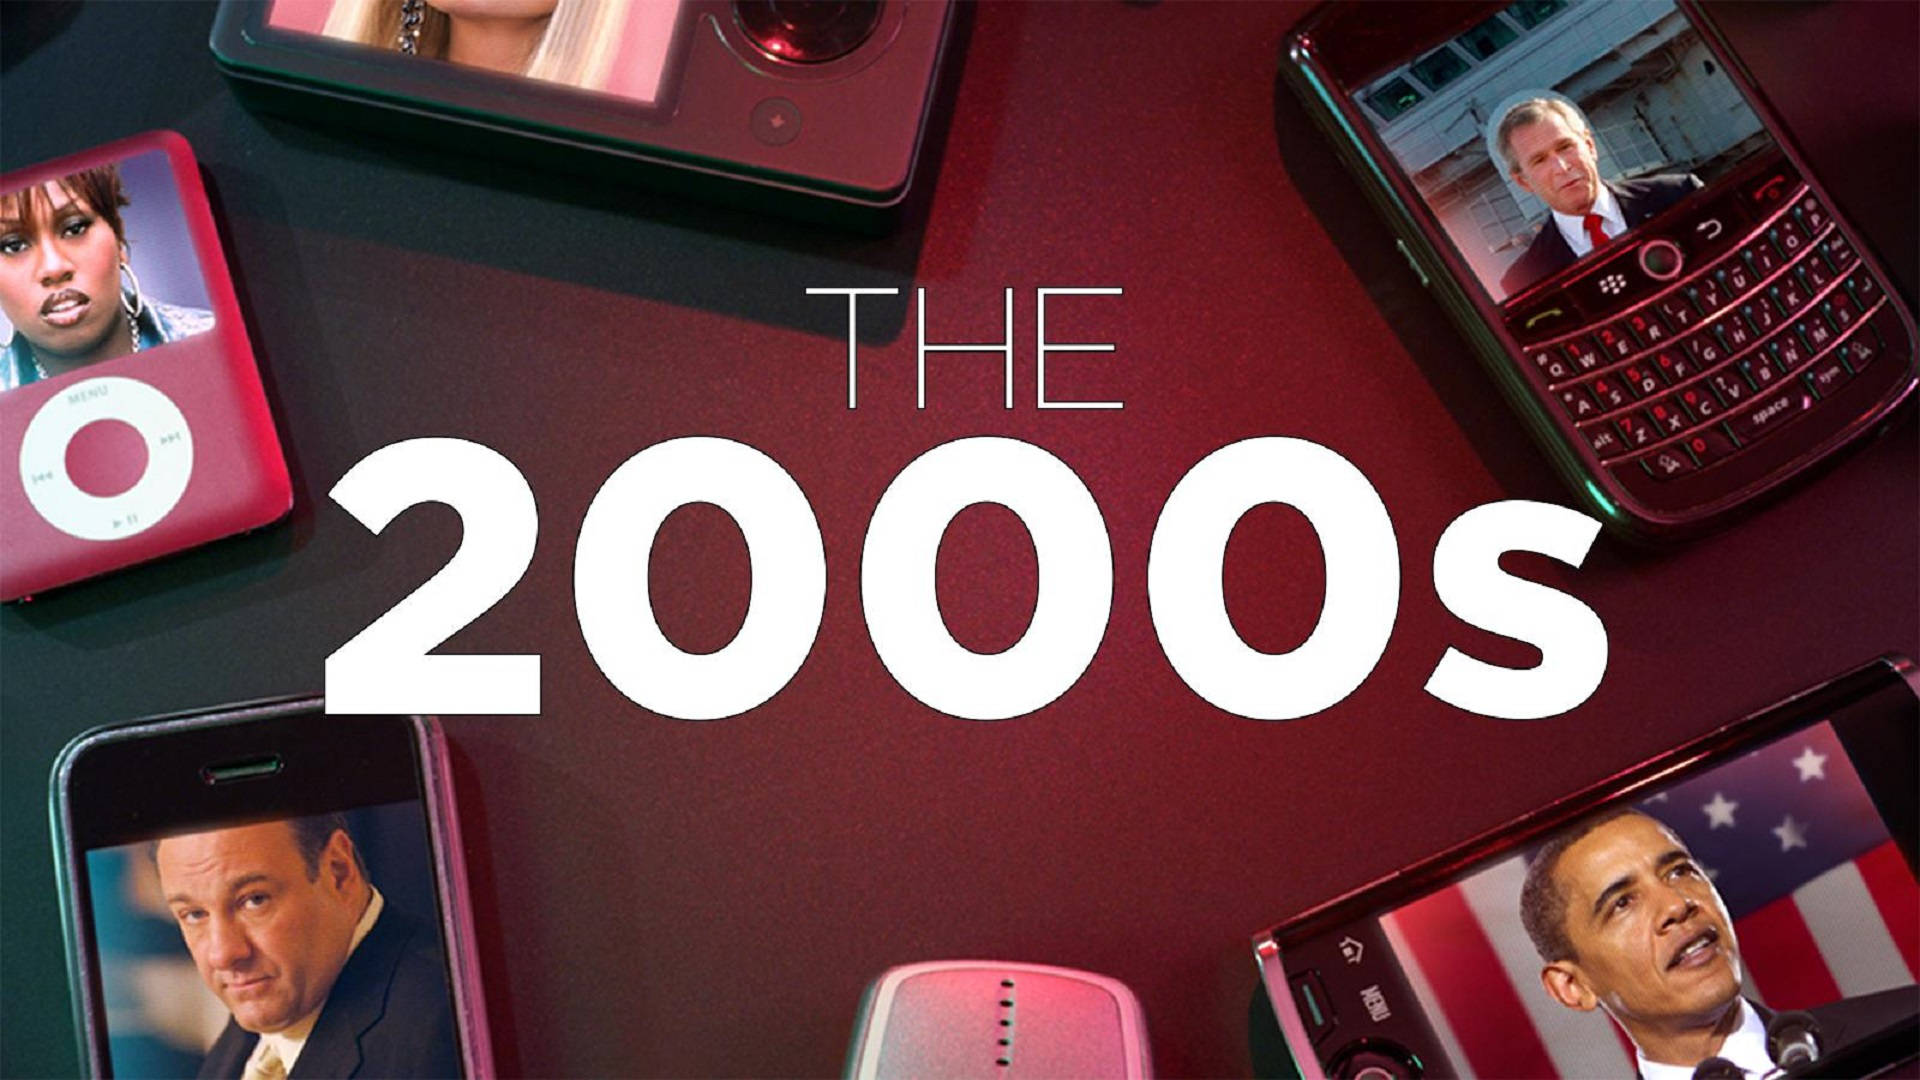 Cnn The 2000s Cover Background